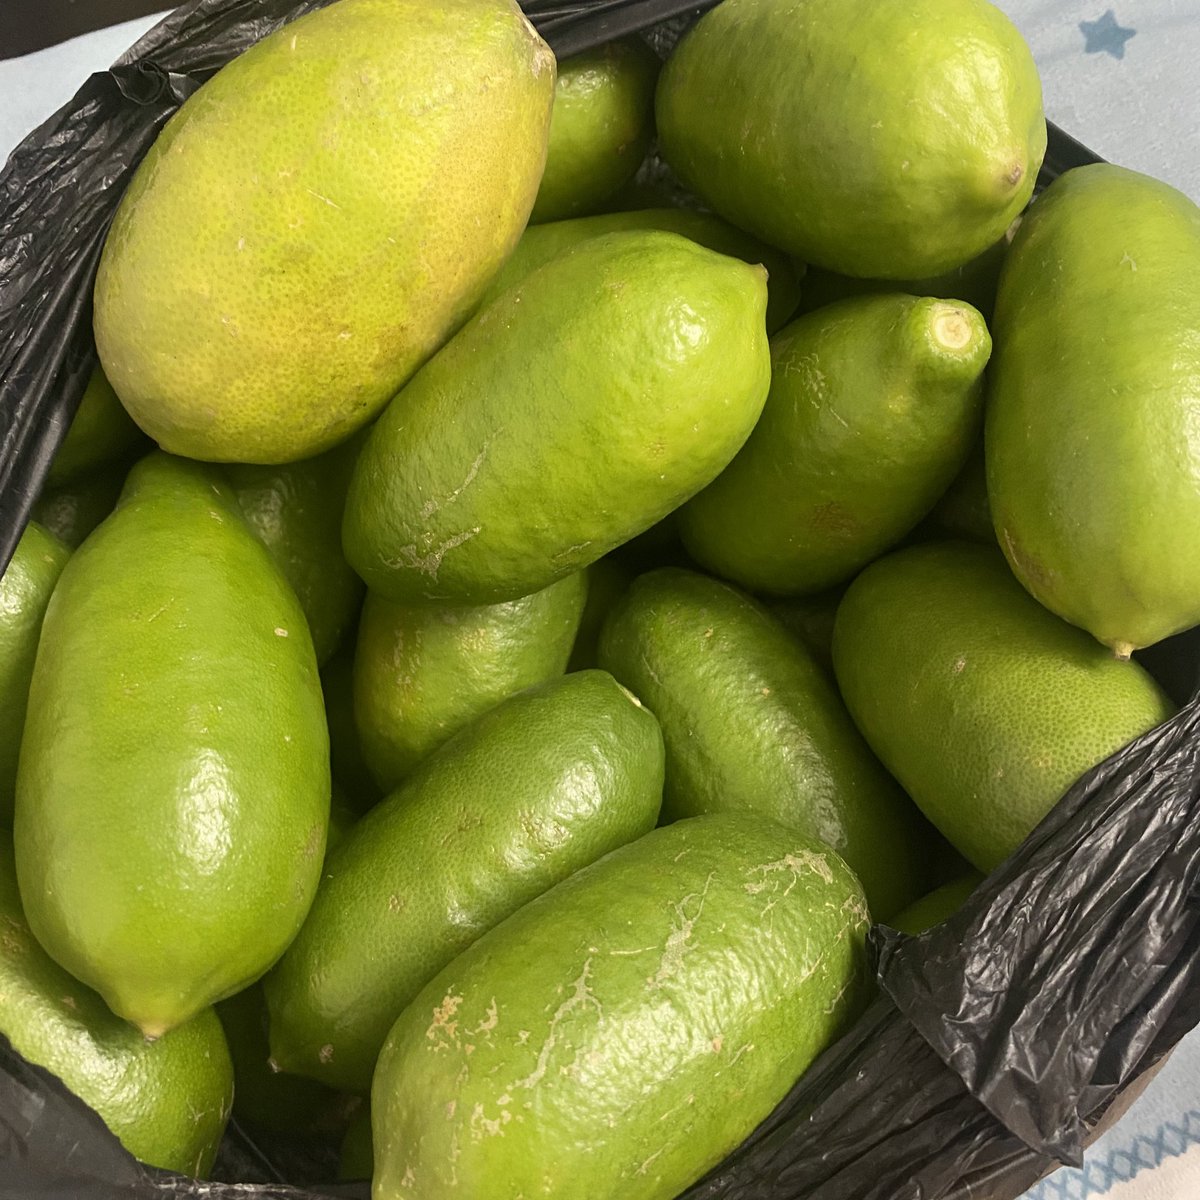 All the way from #ArunachalPradesh to beat the summer heat of #Delhi 

Delhi made me realise how much of lemon person I am than that of a lime! 
Lemon >>> Lime.